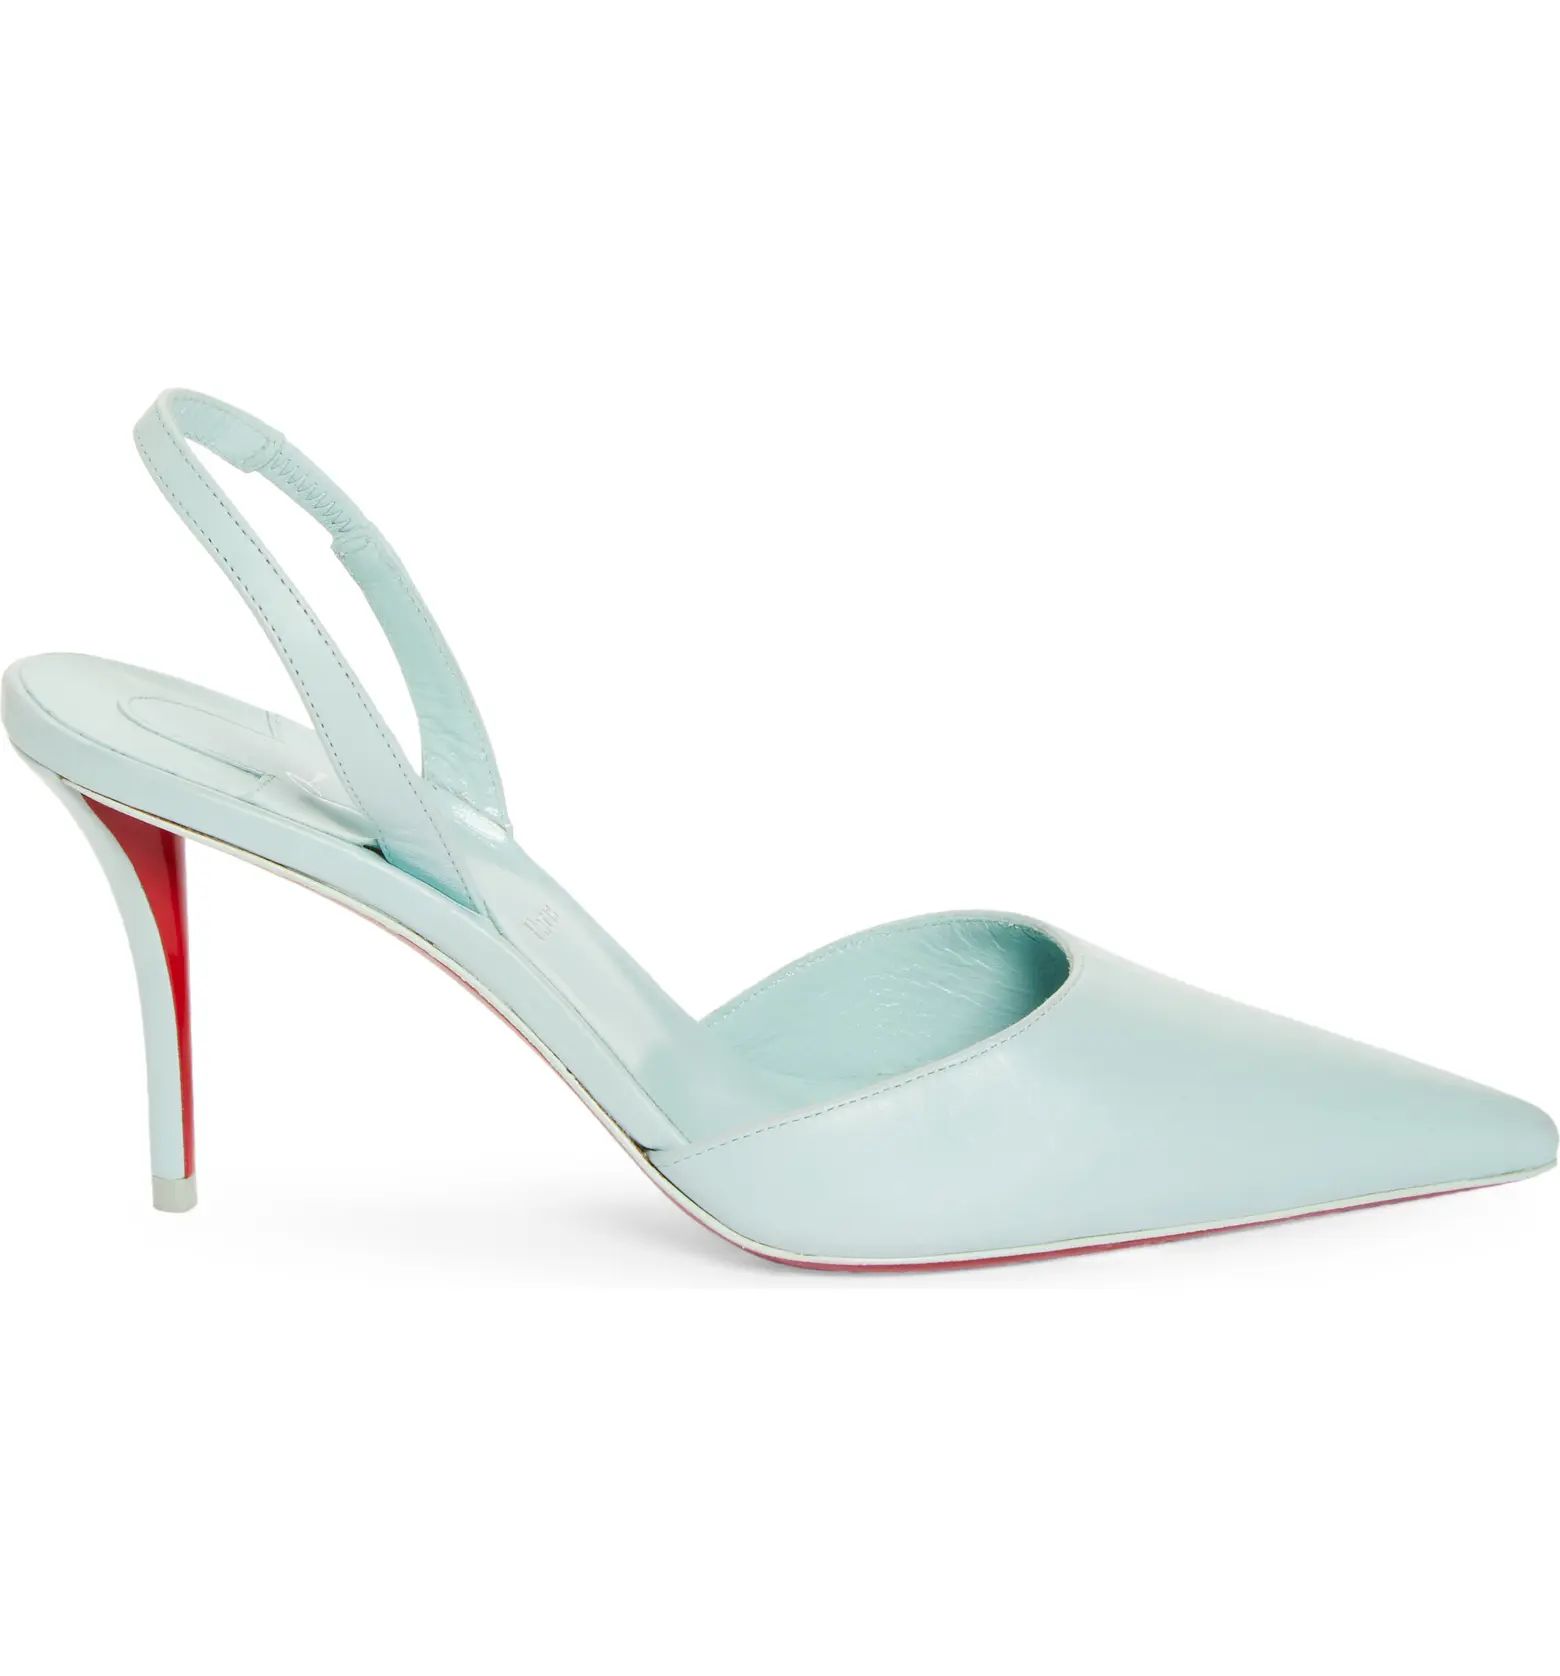 Christian Louboutin Apostropha Pointed Toe Slingback Pump (Women) | Nordstrom | Nordstrom